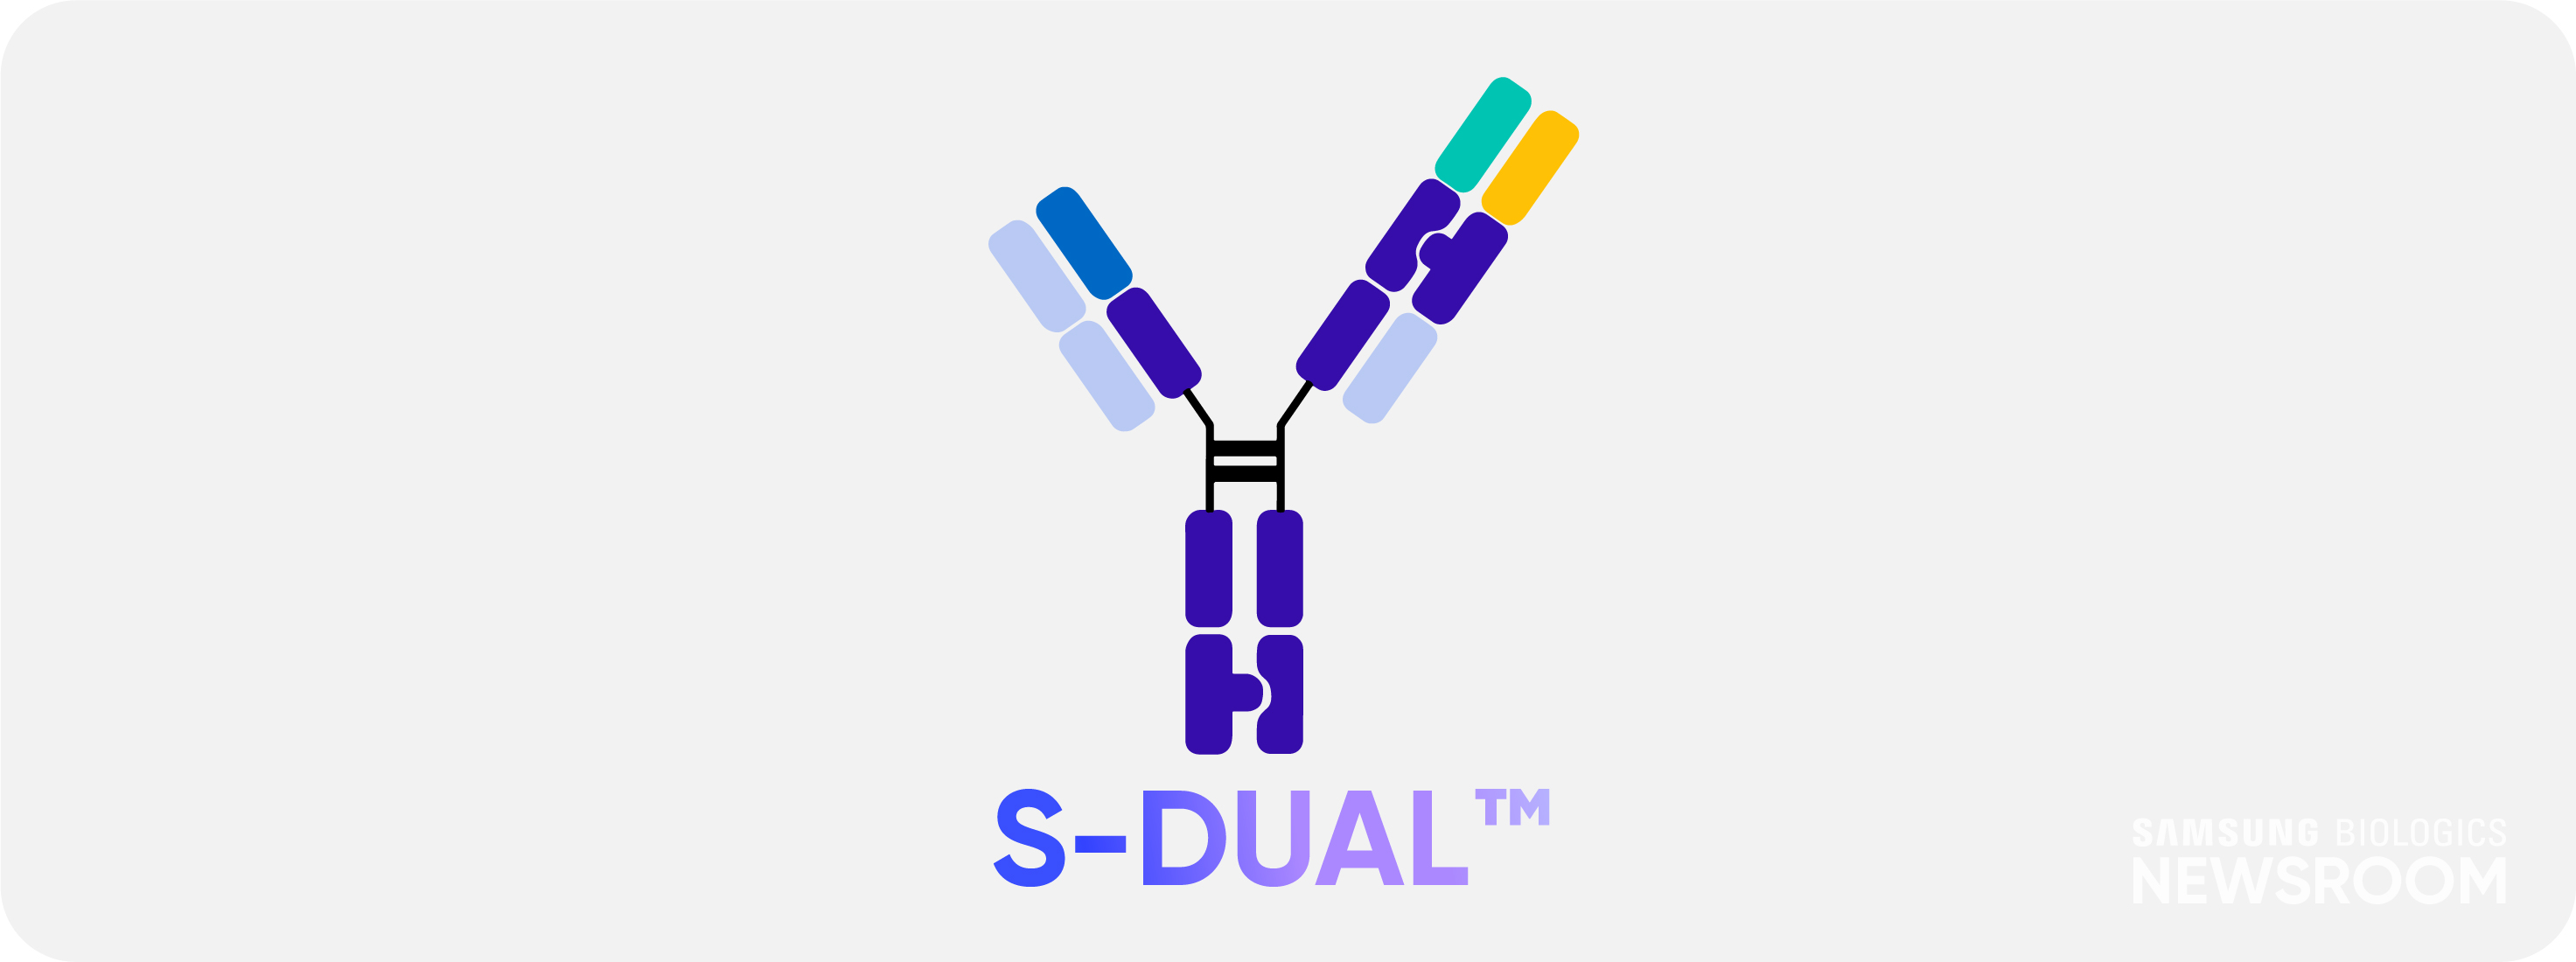 S-DUALTM boasts safety and optimal manufacturability images 1